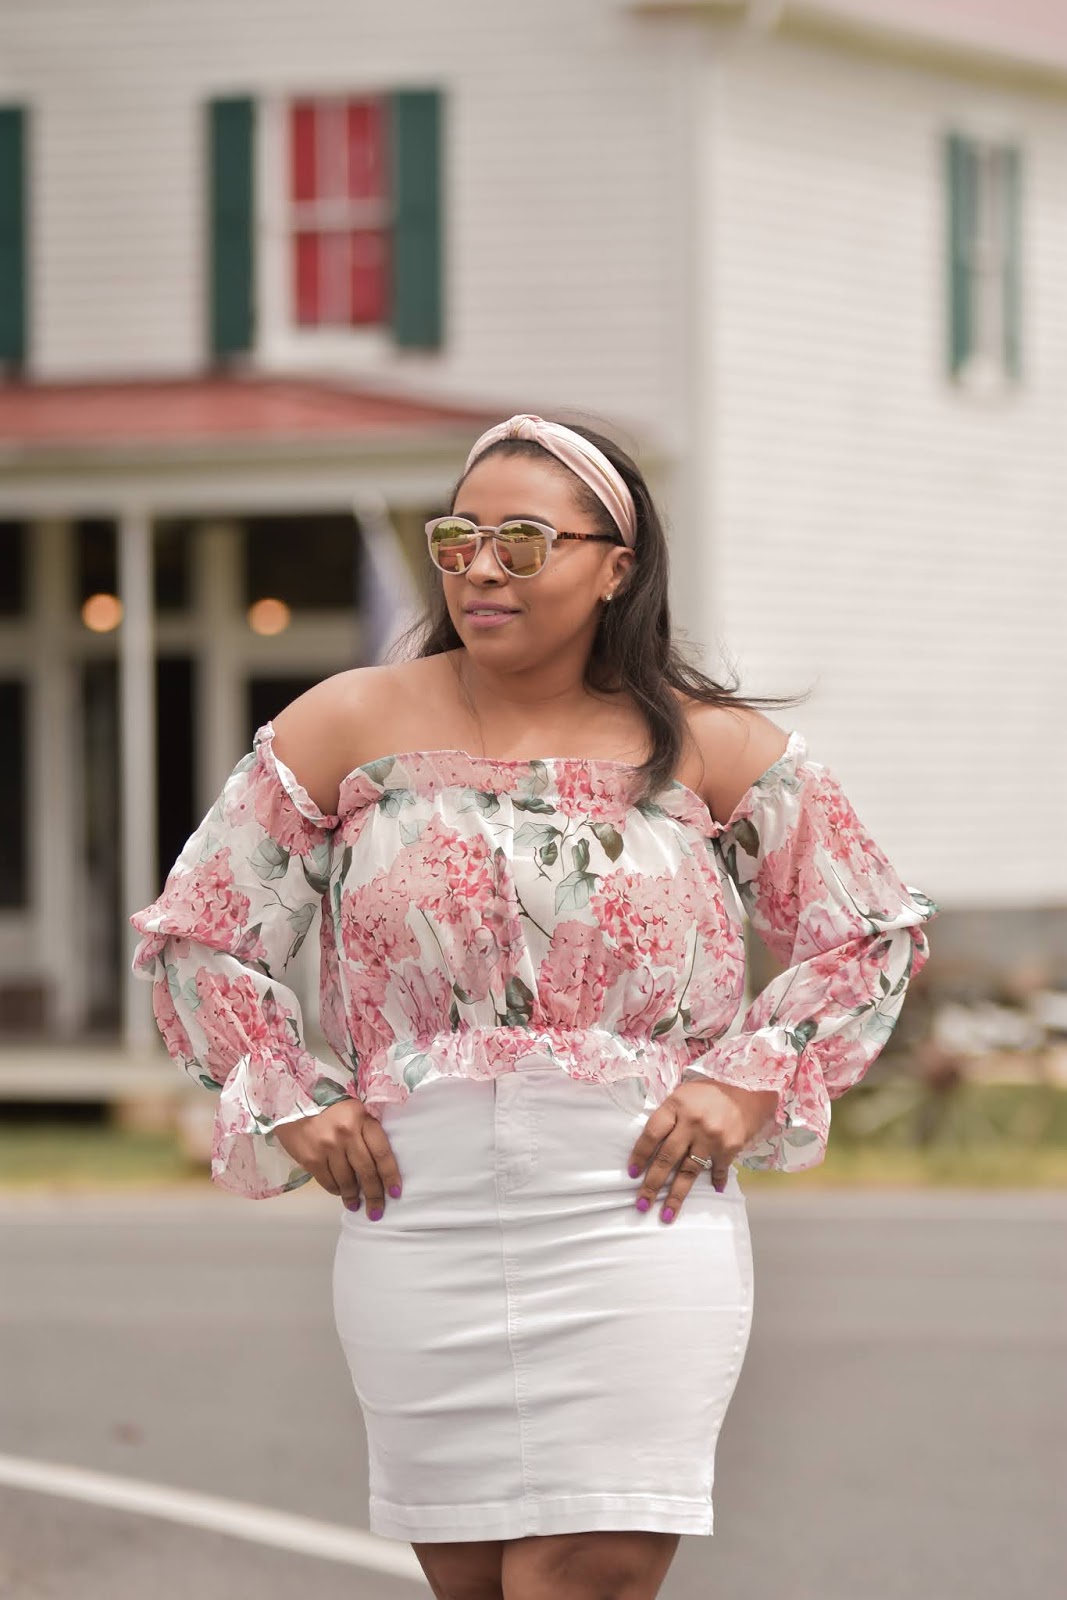 shein, shein reviews, floral top, summer outfit ideas, chic summer outfit , pattys klsoet.